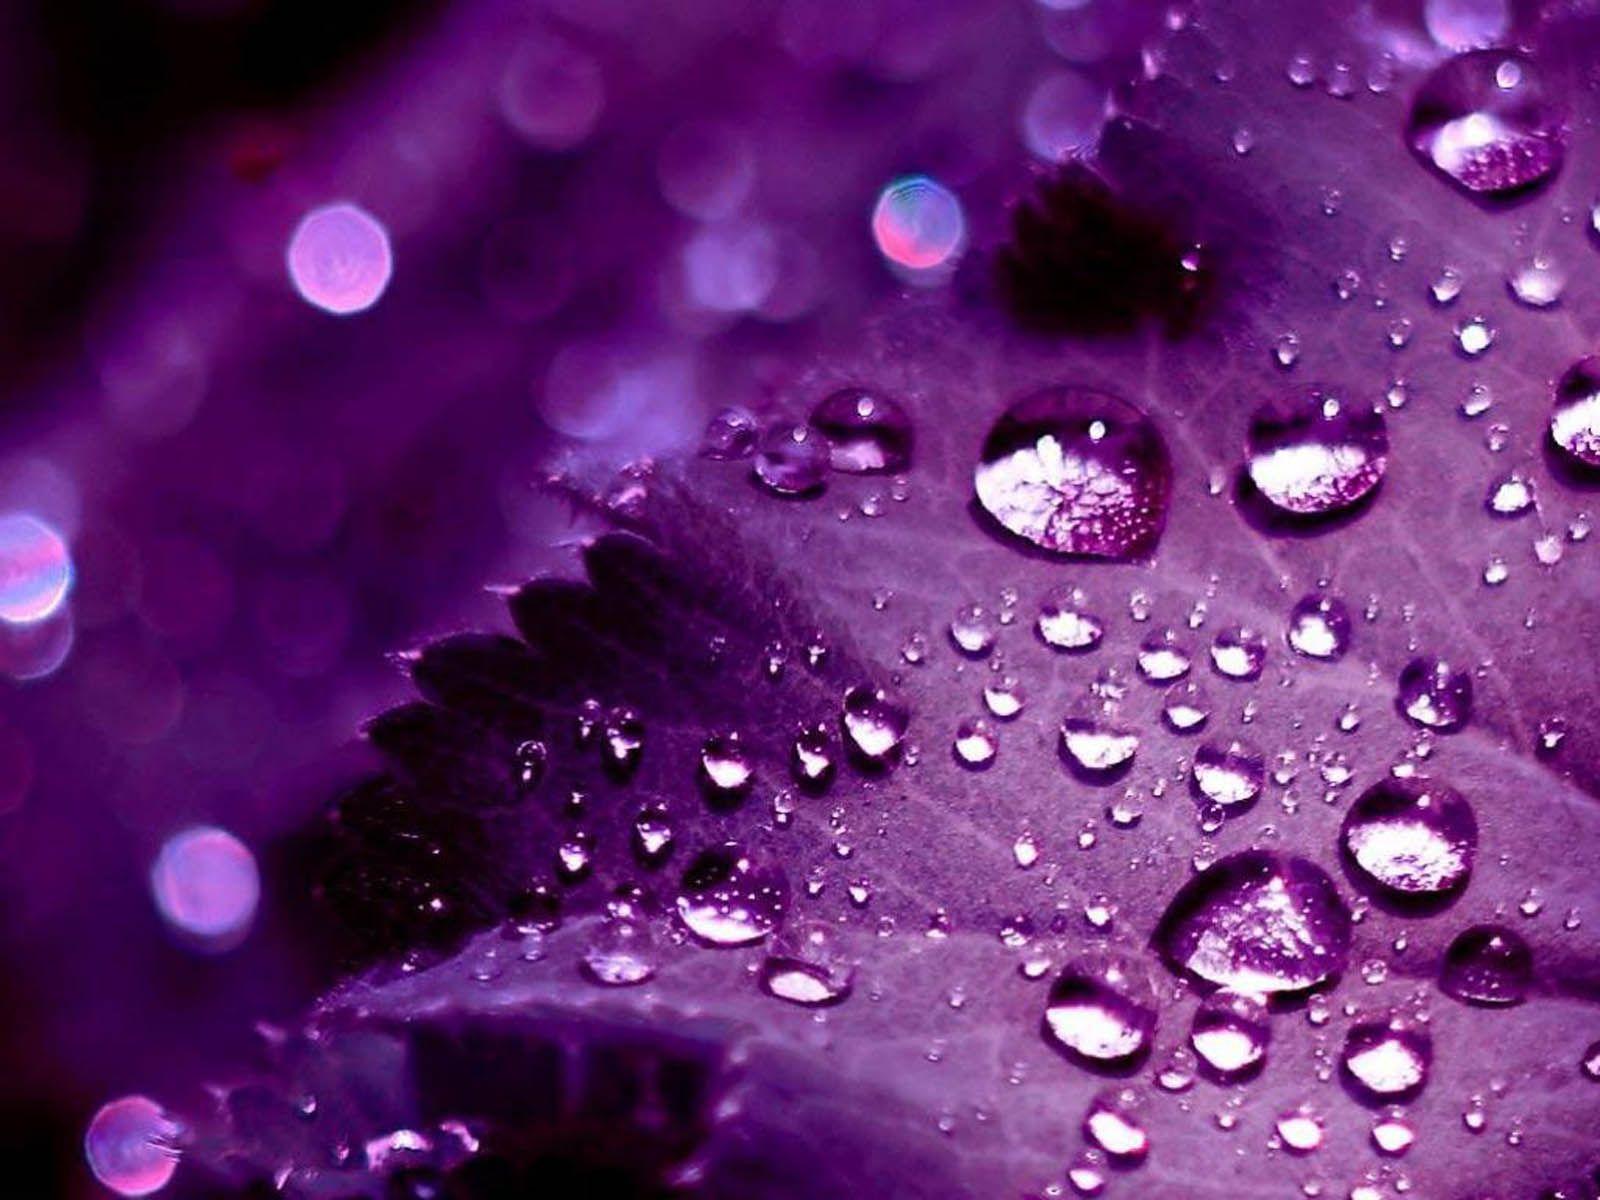 HD Purple Wallpaper Background Image To Download For Free